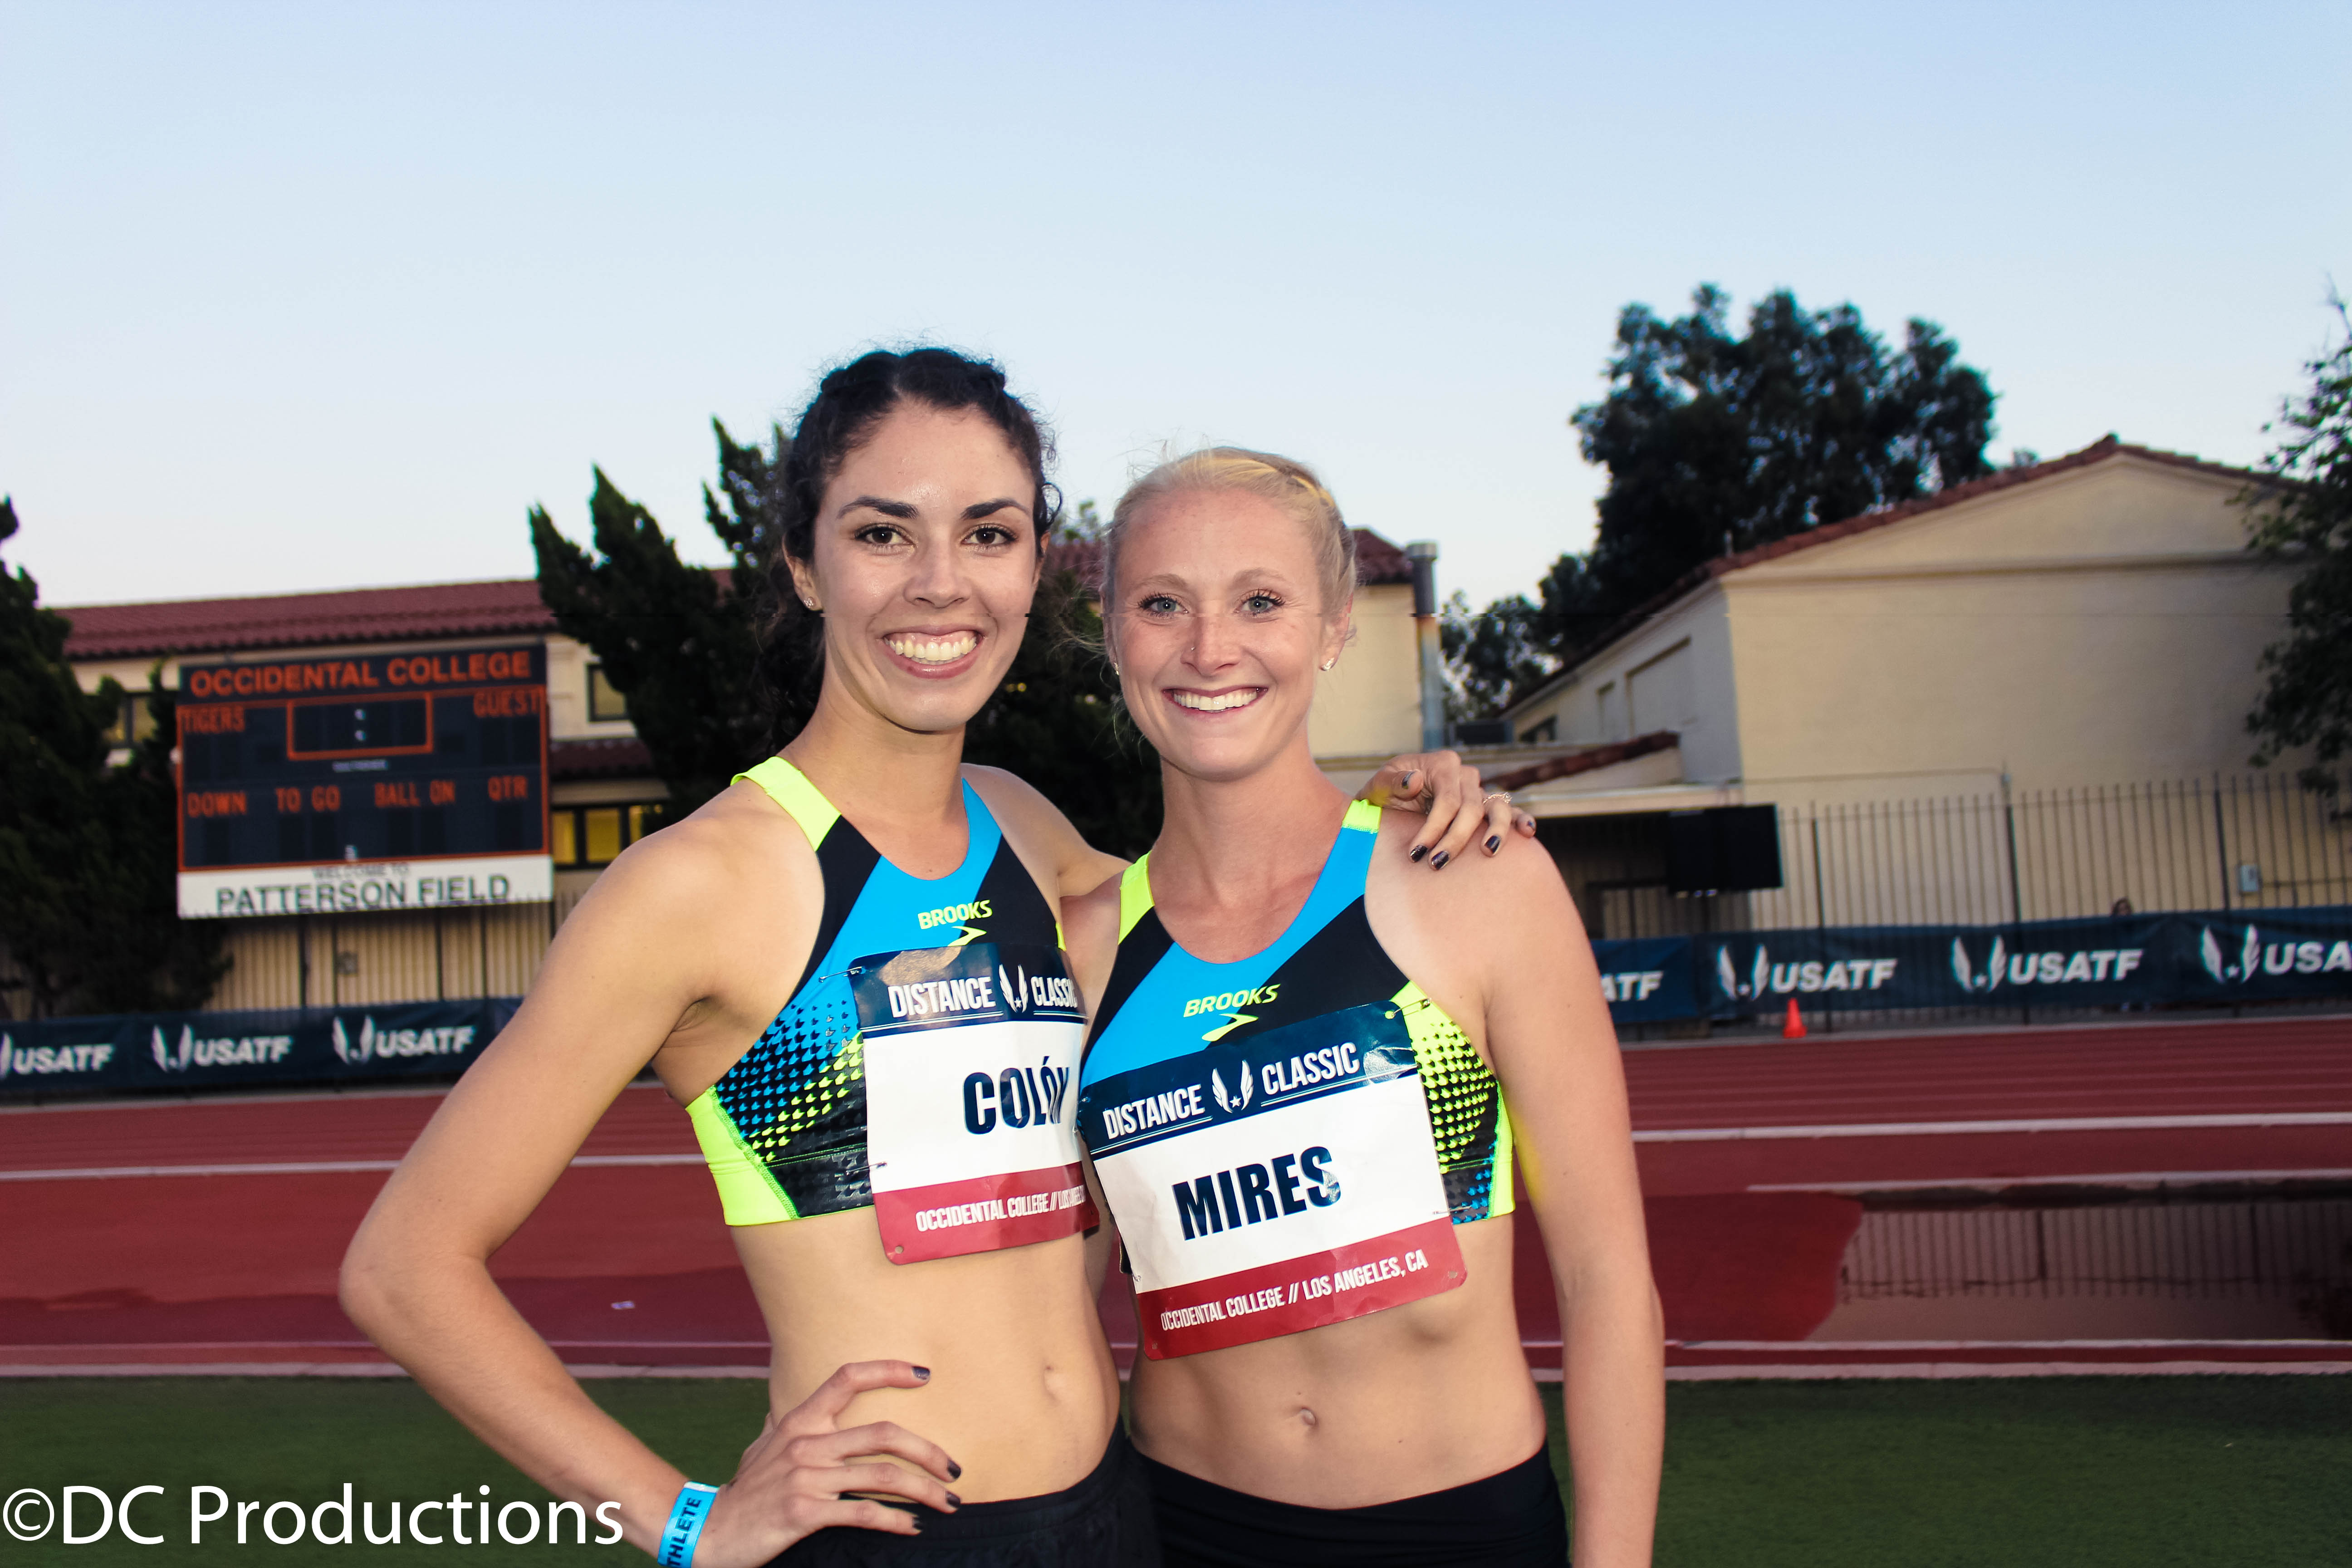 USATF Channel A TV Coverage at Occidental College in California